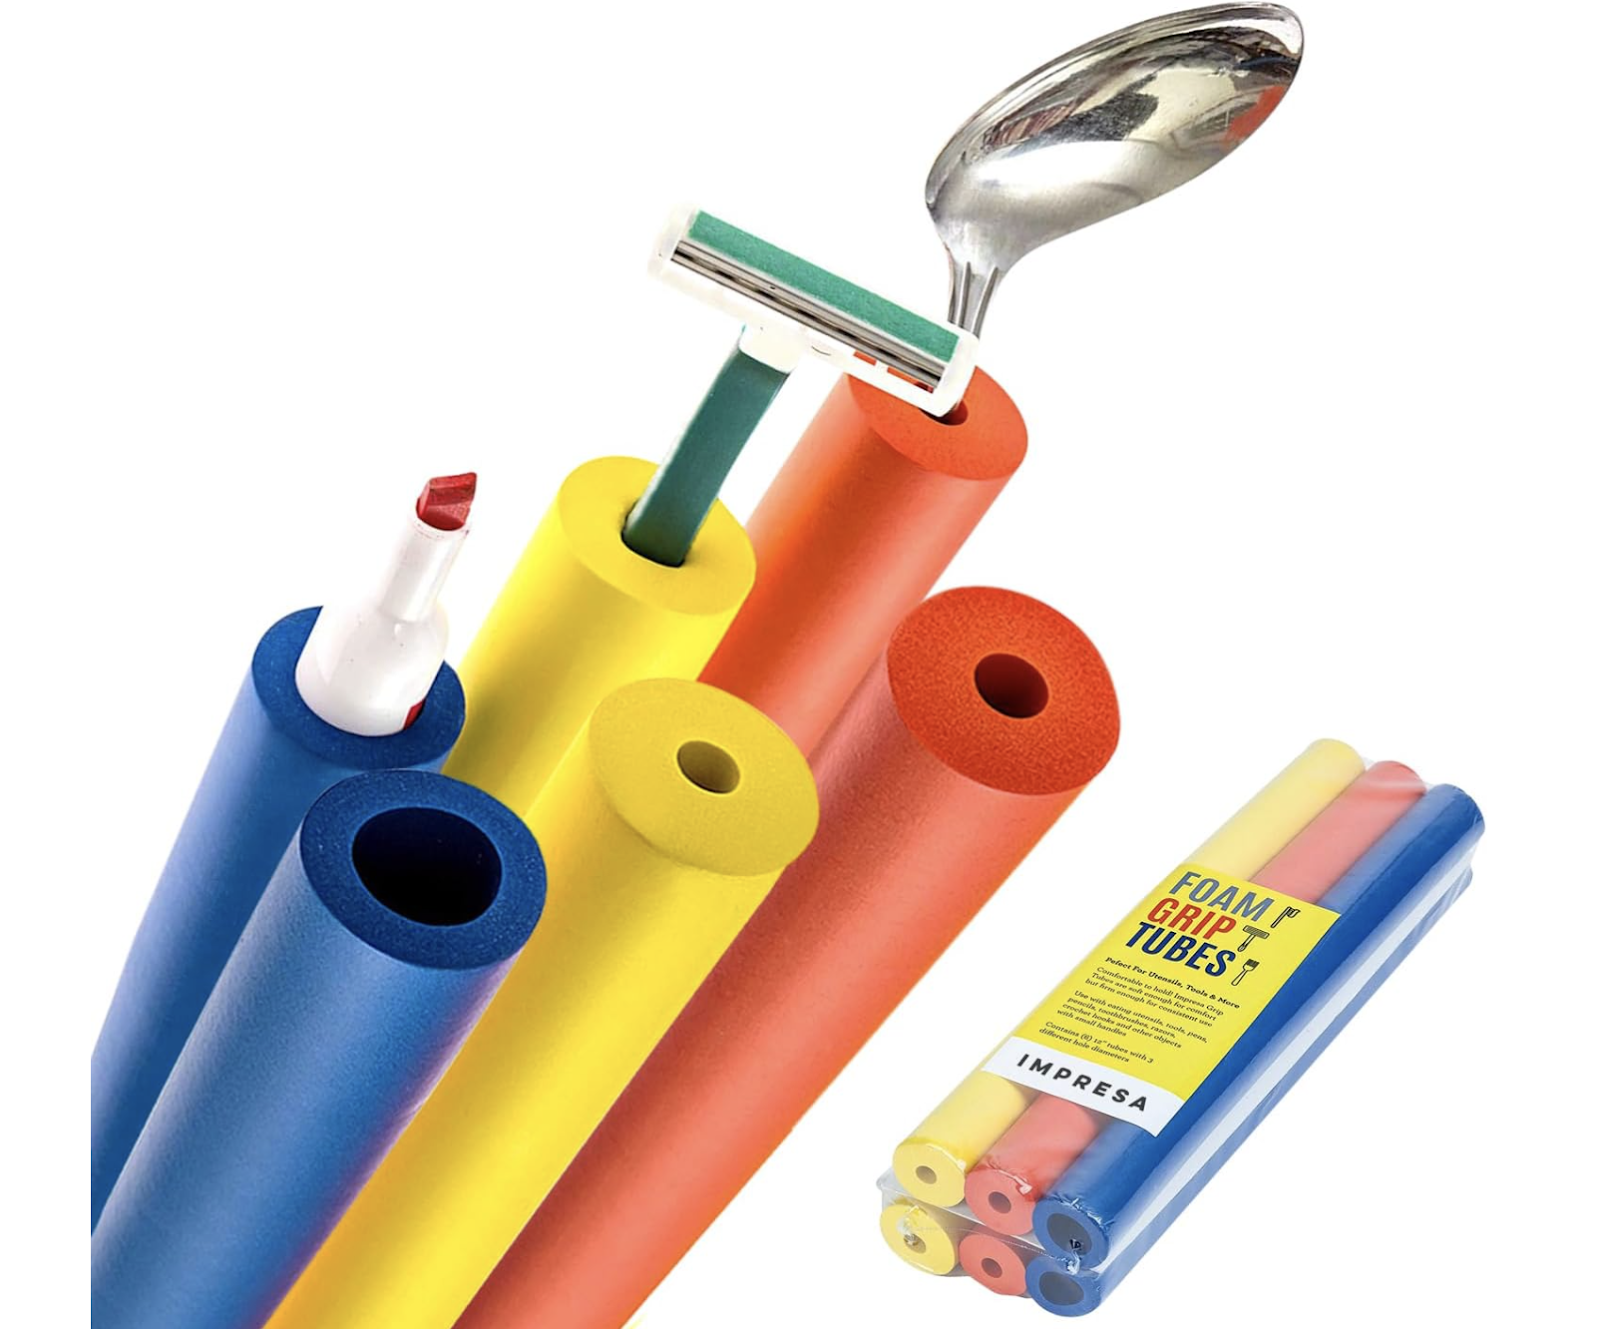 foam grips holding a razor, marker, and spoon in blue, yellow, and orange